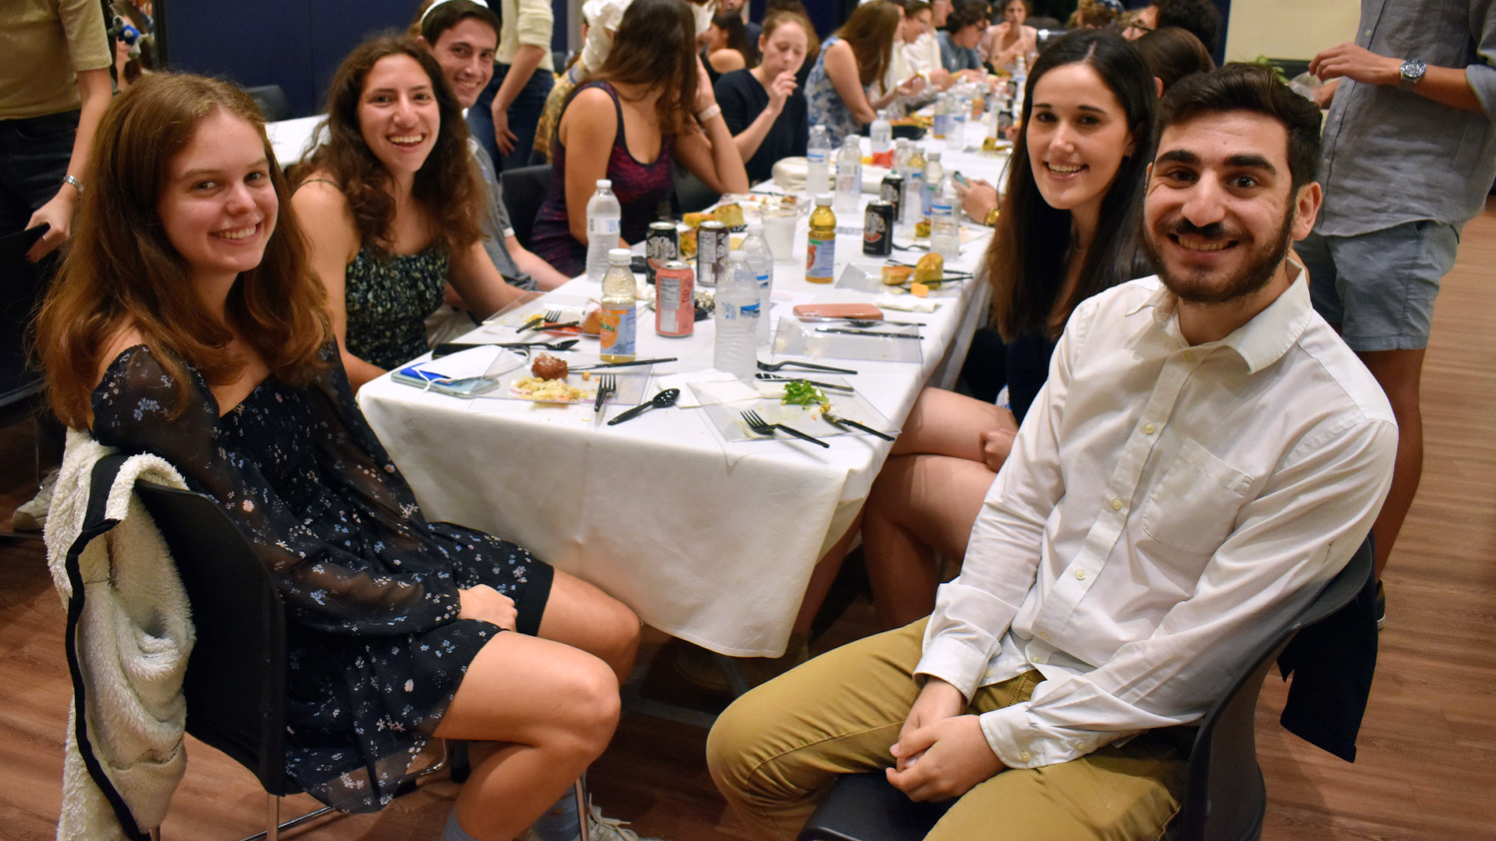 Jewish students eating a meal together